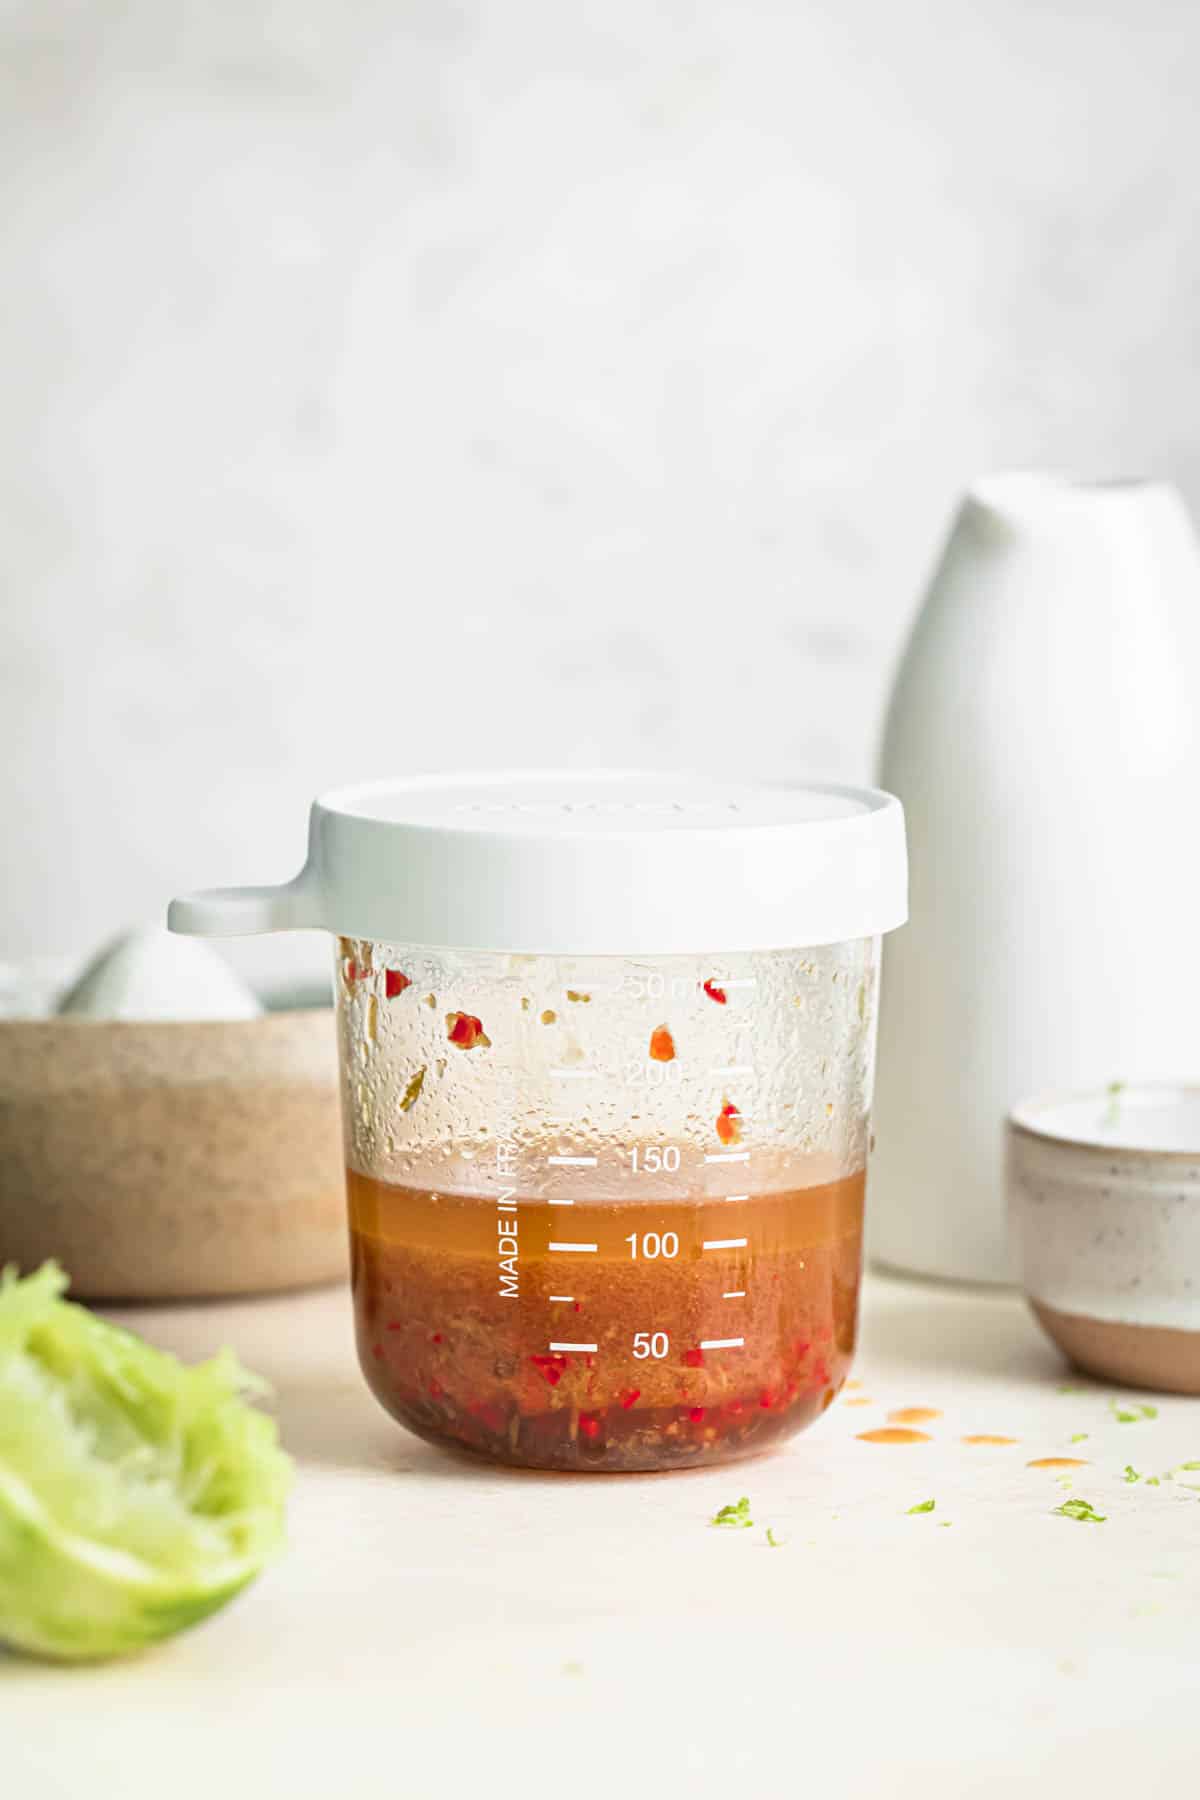 Chili lime dressing in a glass jar with an airtight silicon lid.